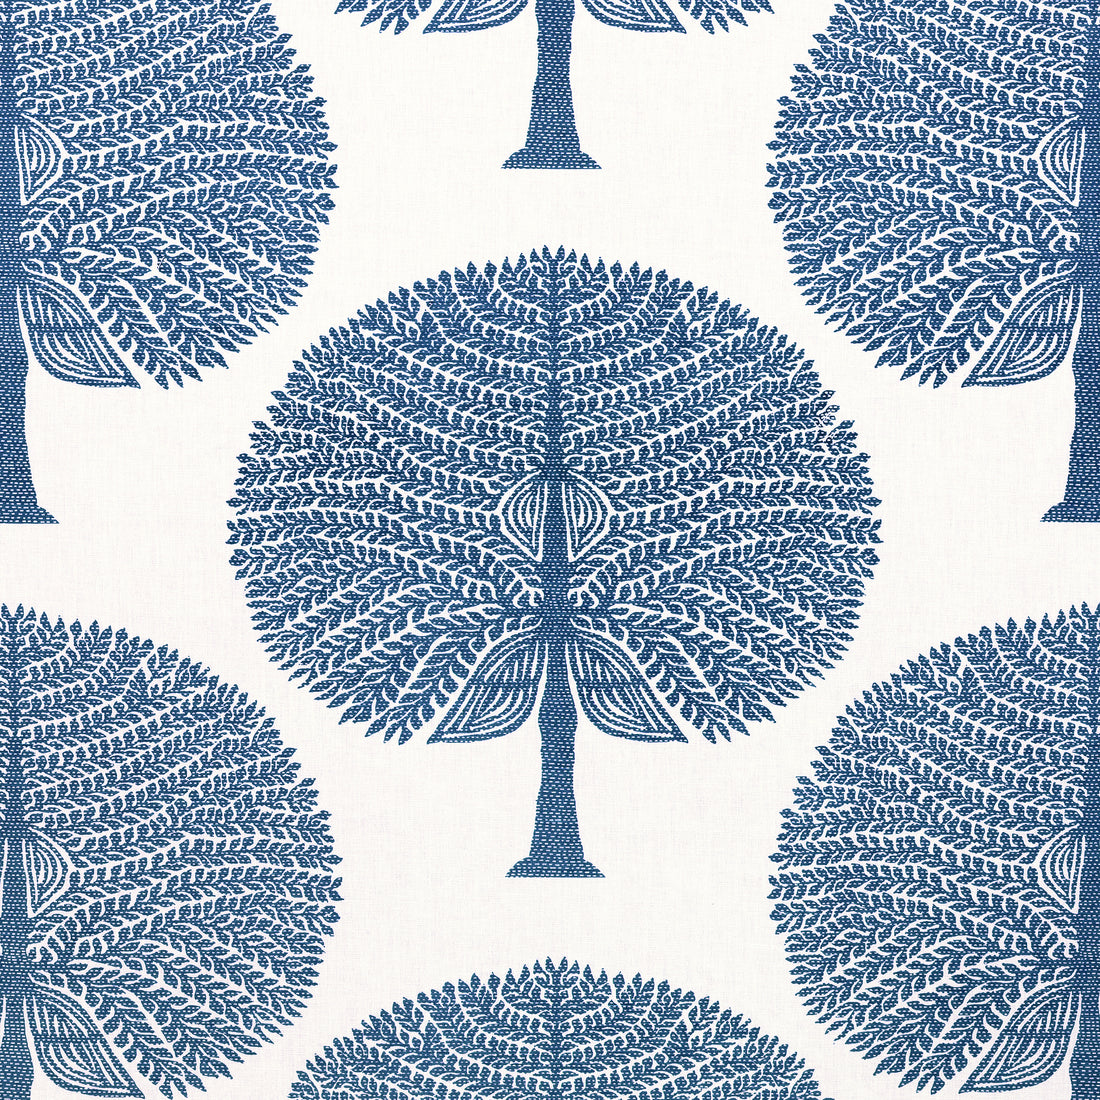 Mulberry Tree fabric in navy color - pattern number F910603 - by Thibaut in the Ceylon collection